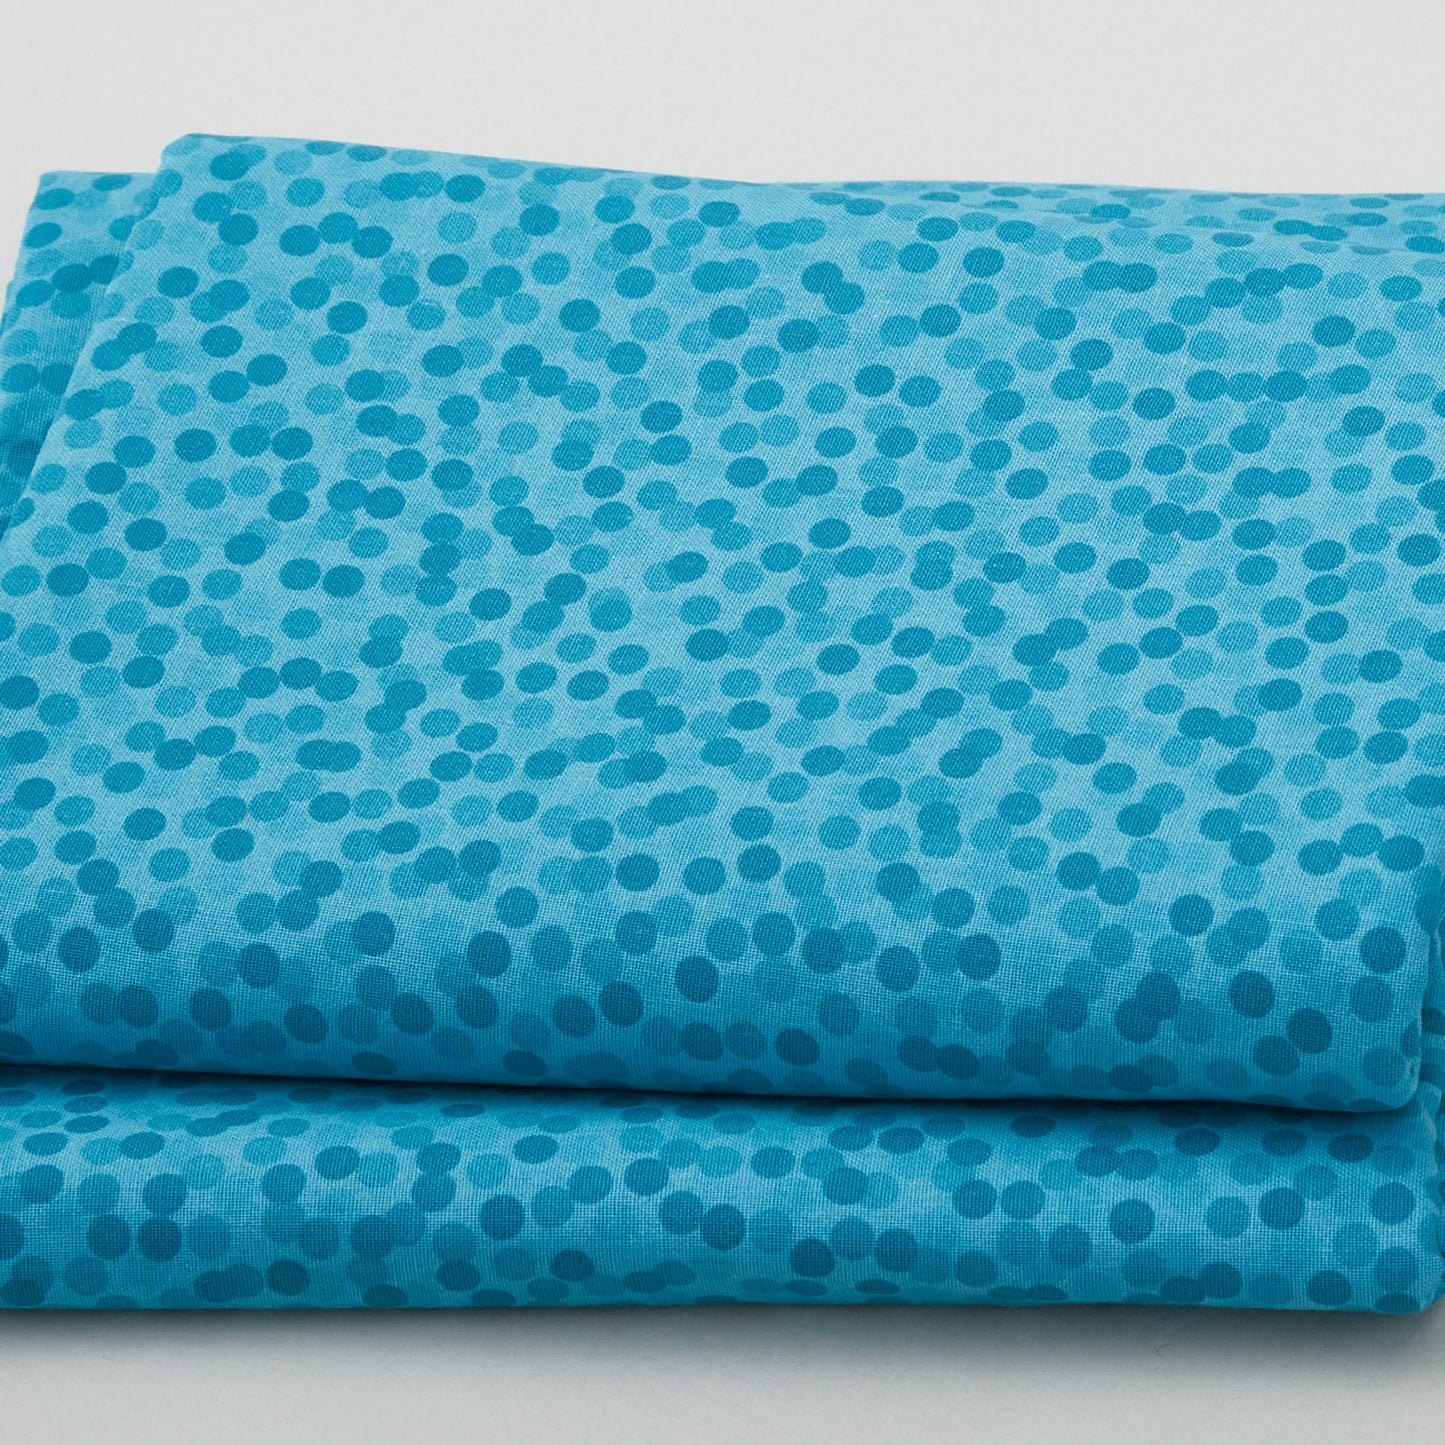 Chromadots - Dots Turquoise 3 Yard Cut Primary Image